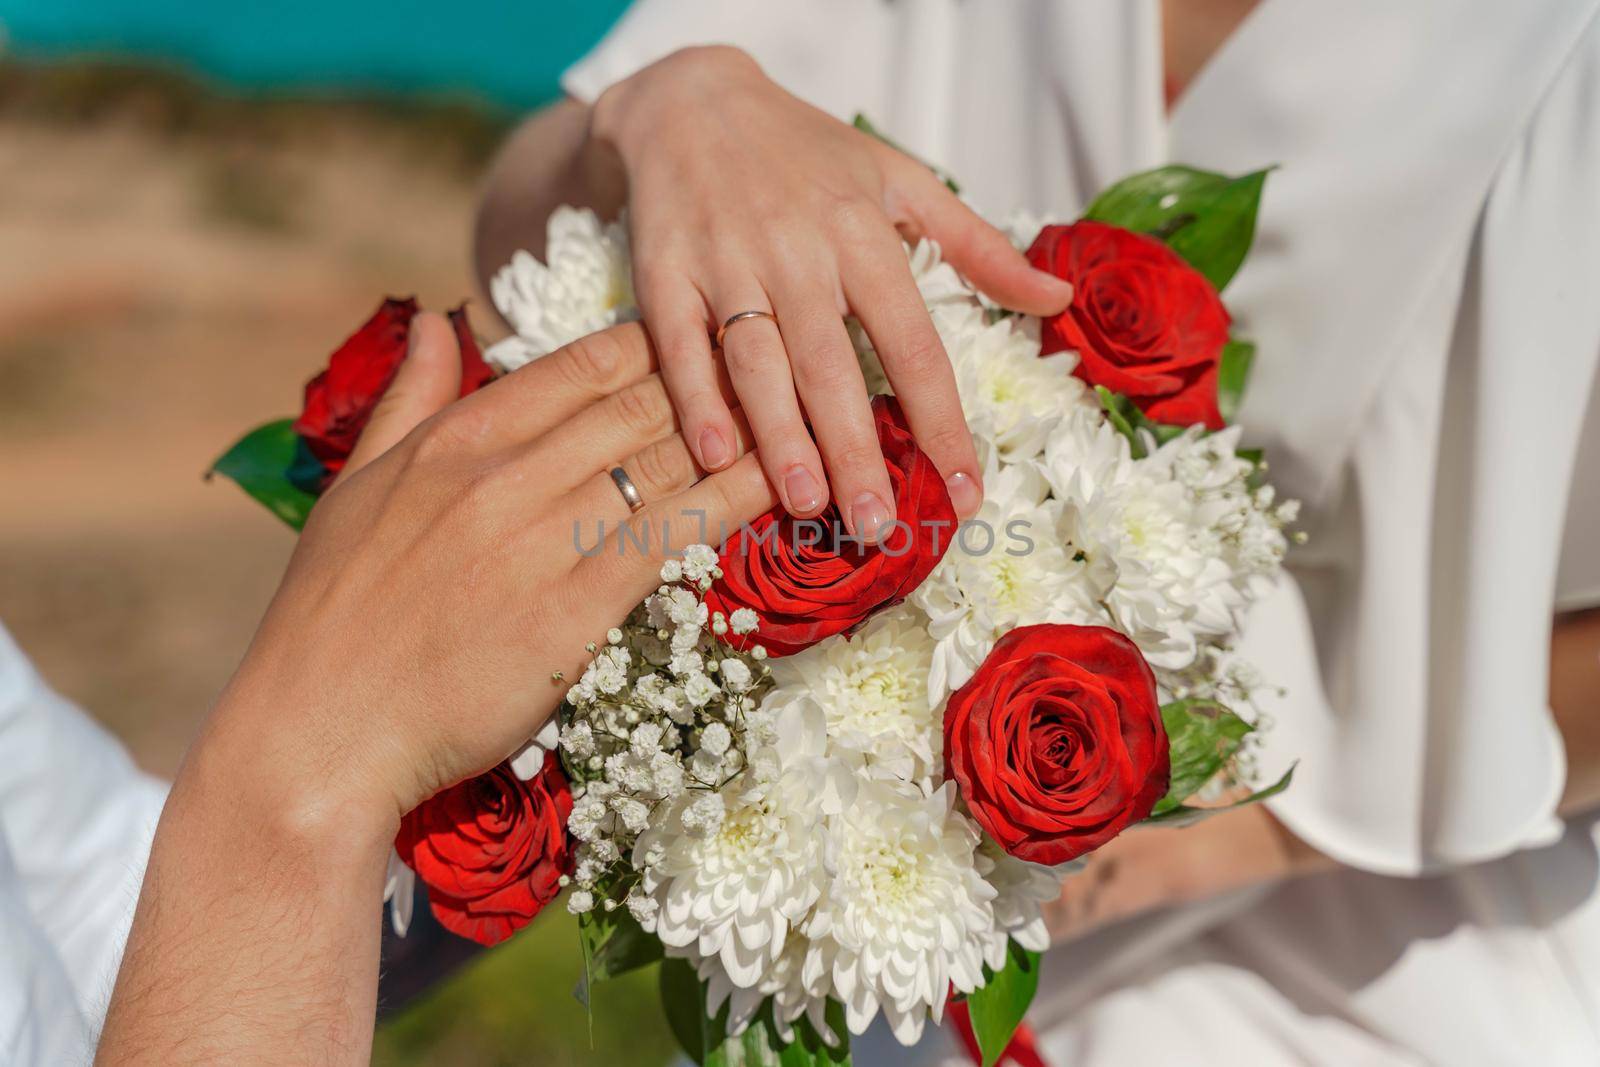 Hands of the groom and the bride with wedding rings on top of the bride's bouquet by Matiunina